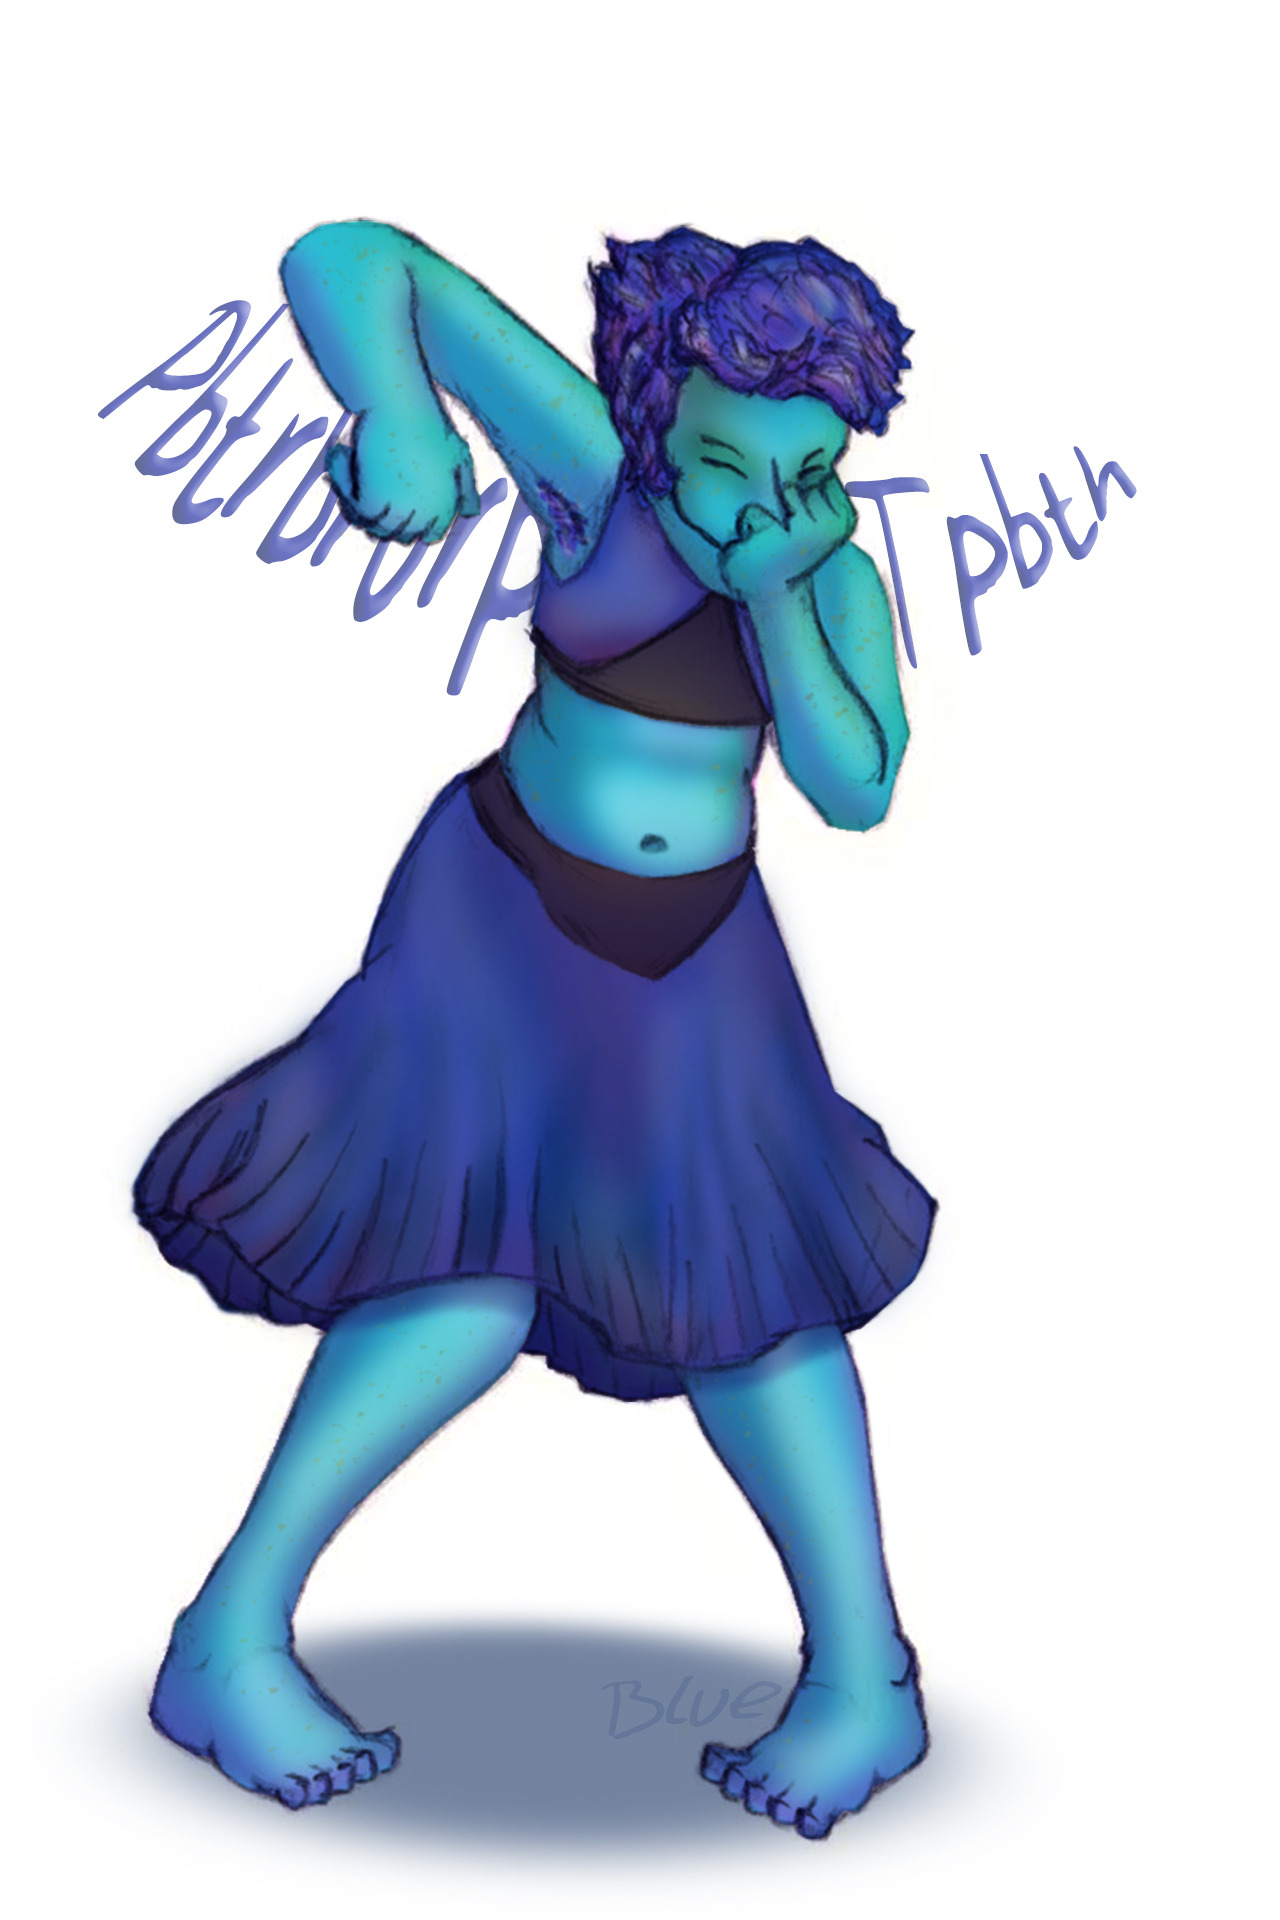 Local Smurfette blows rasberries into hand, authorities horrified. Another Lapis.